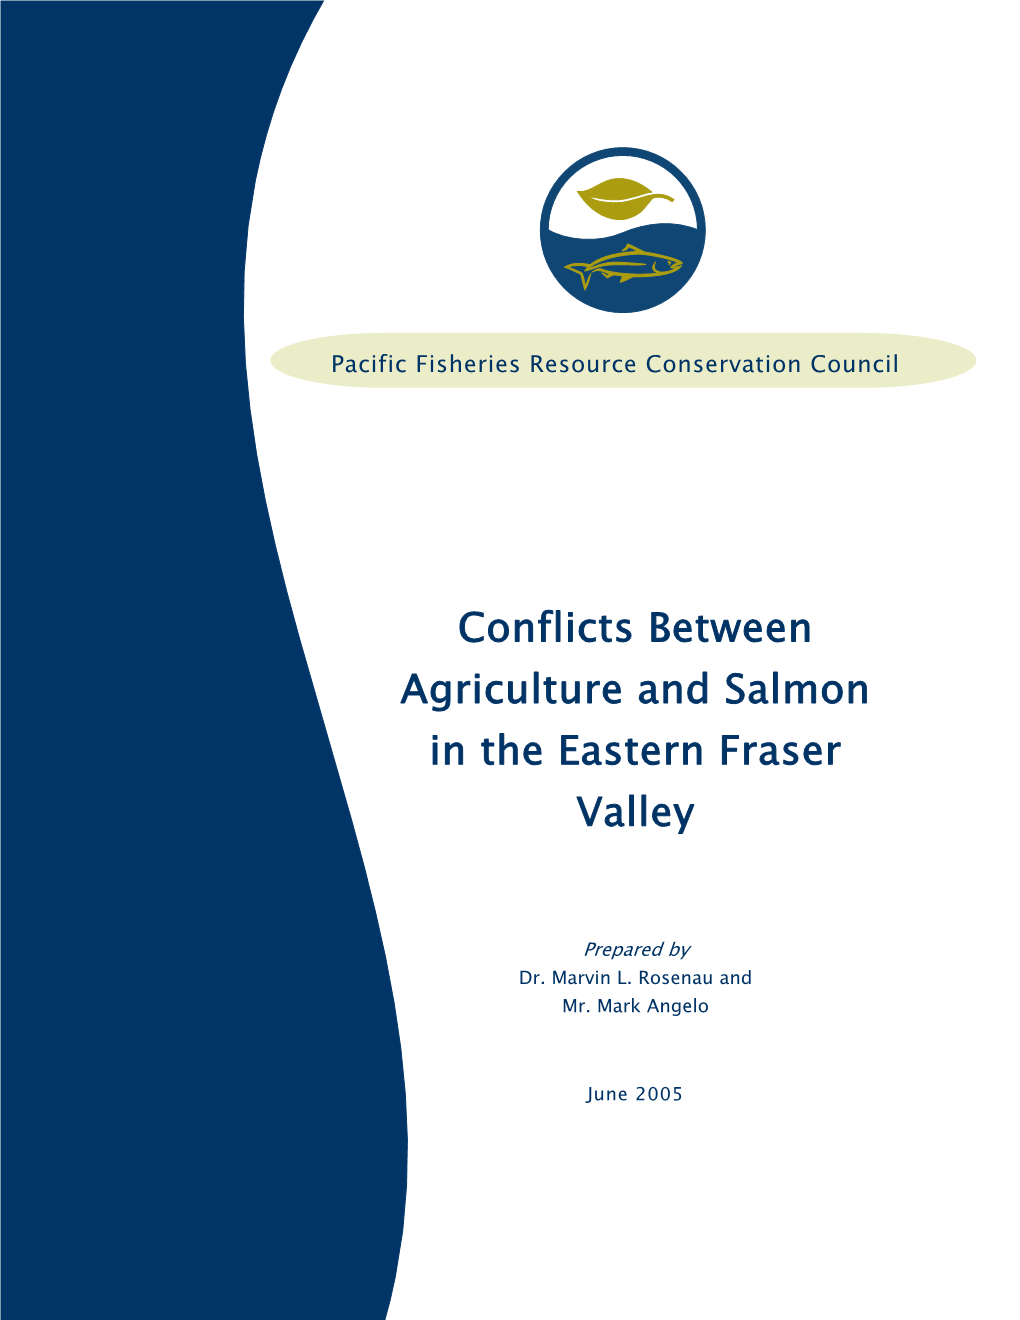 Conflicts Between Agriculture and Salmon in the Eastern Fraser Valley